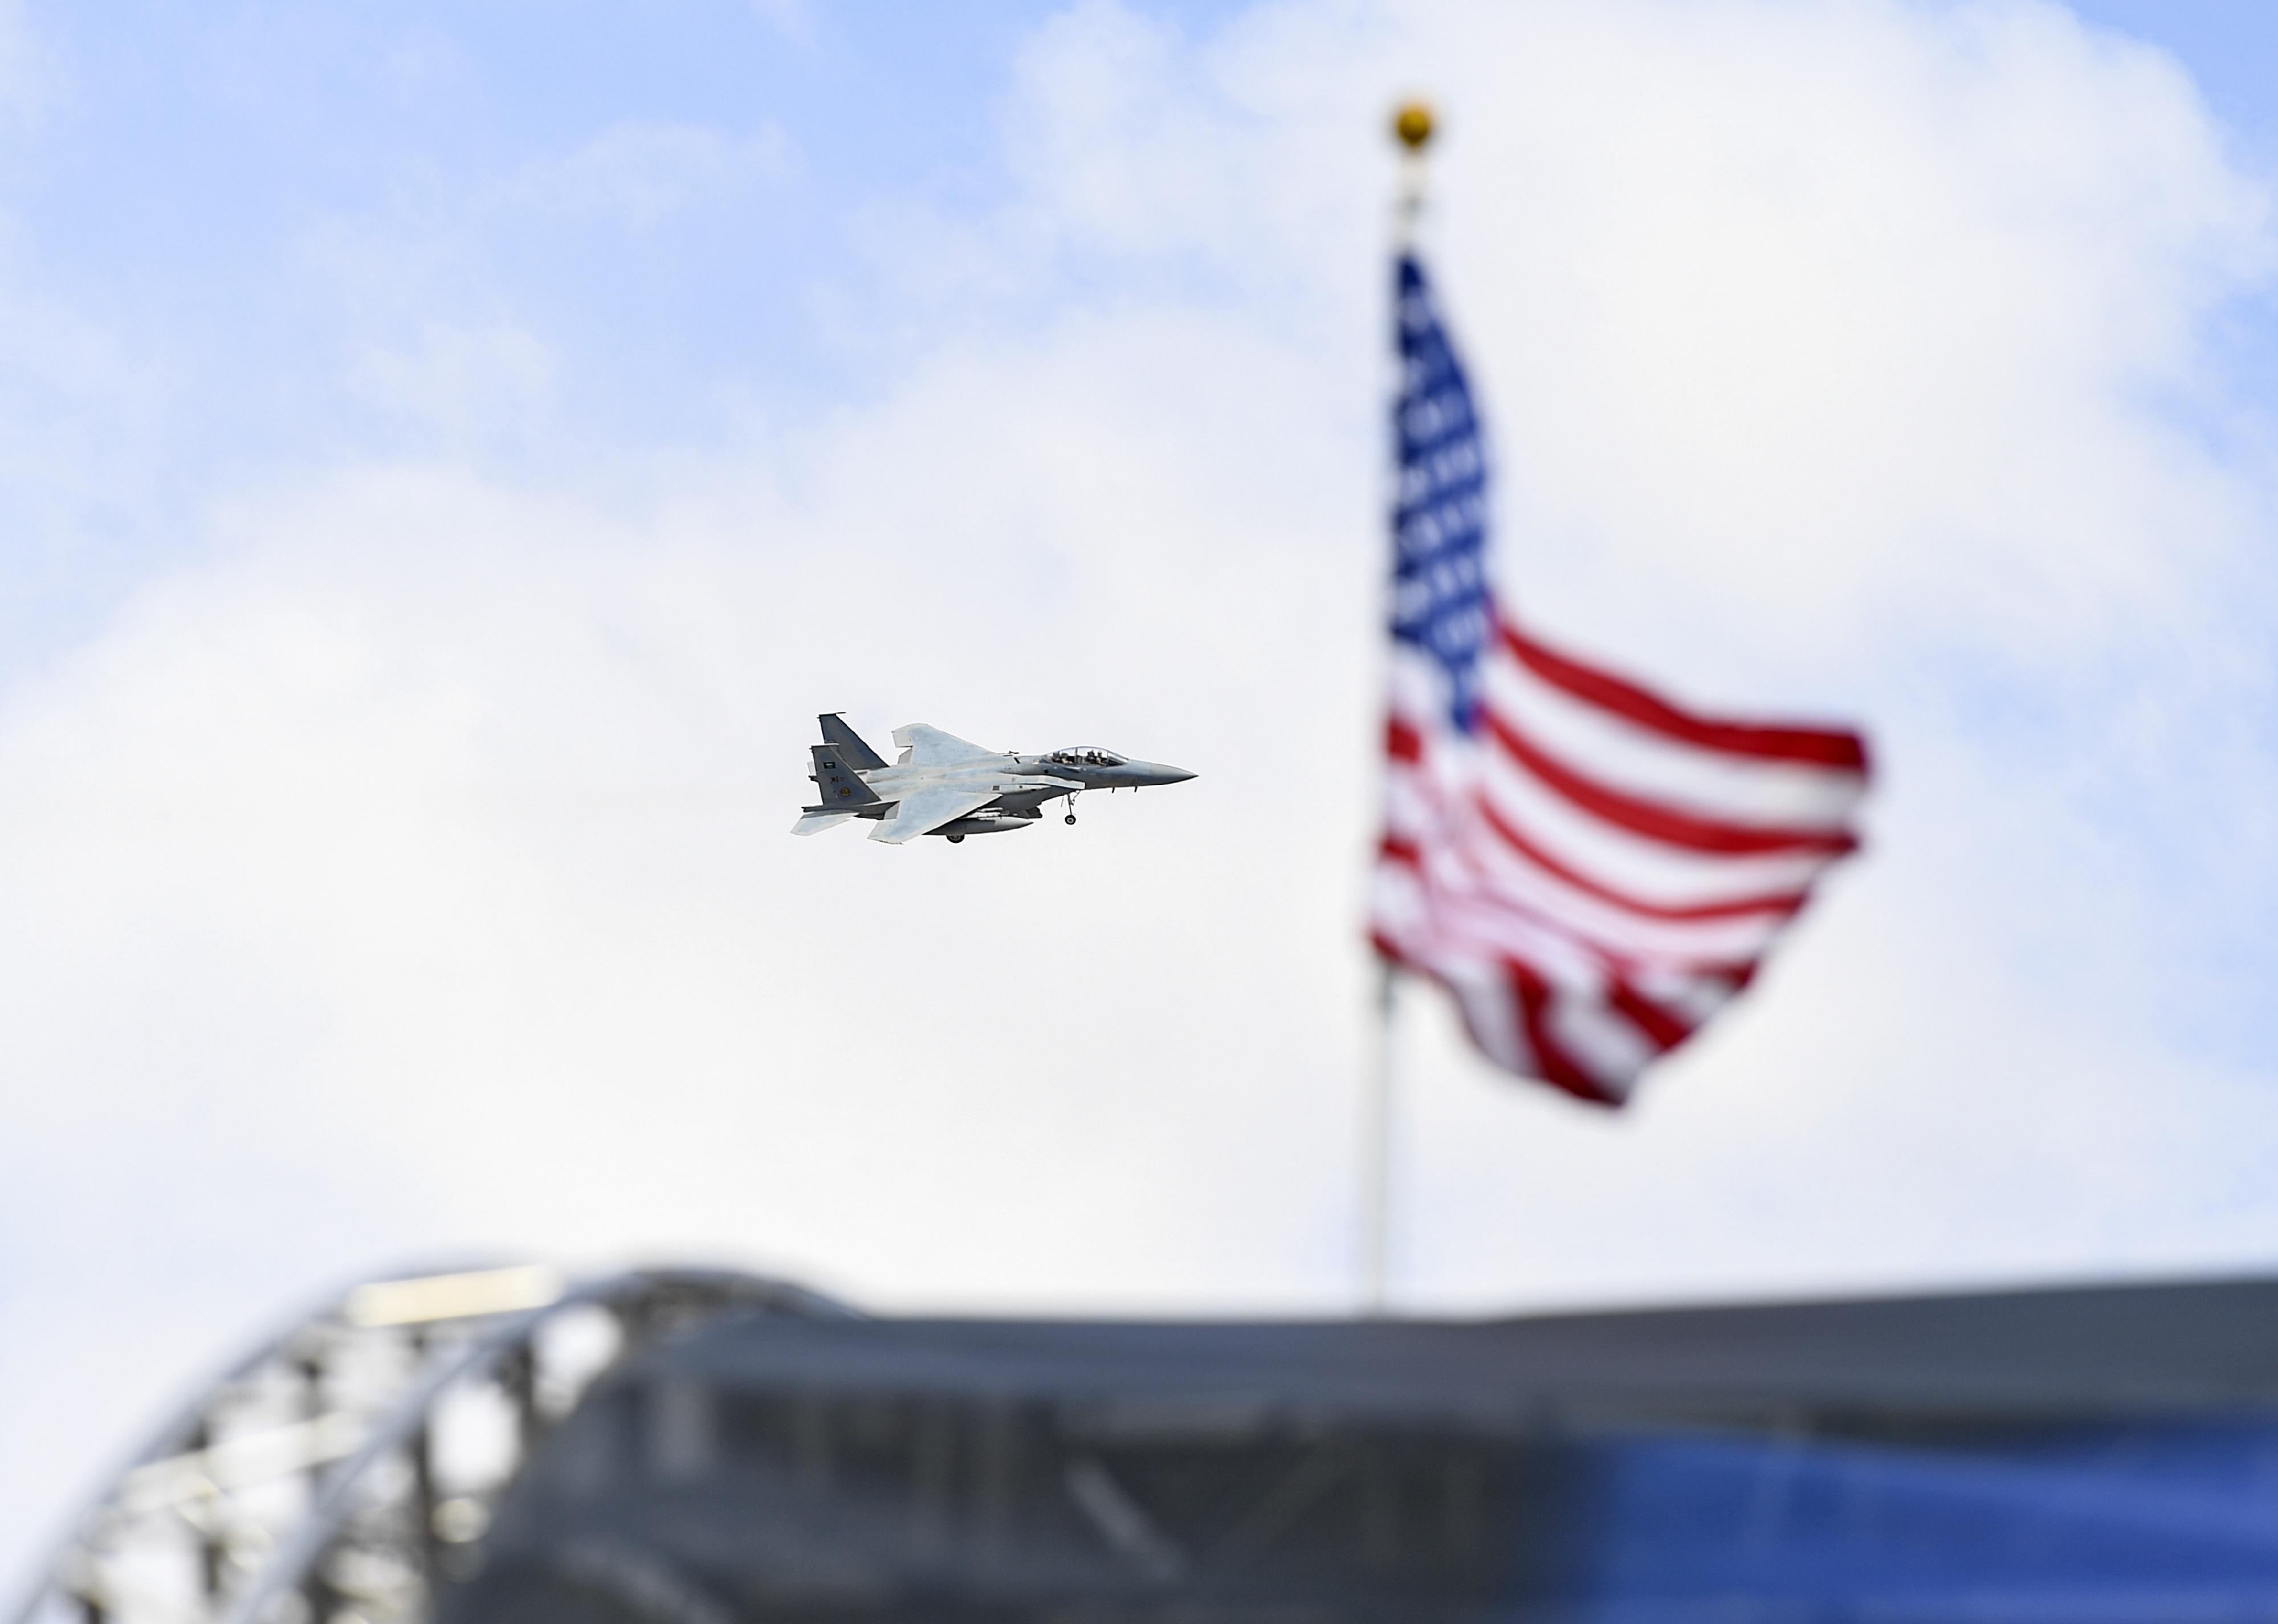 An F-15 approaching to land with an American flag in the foreground.